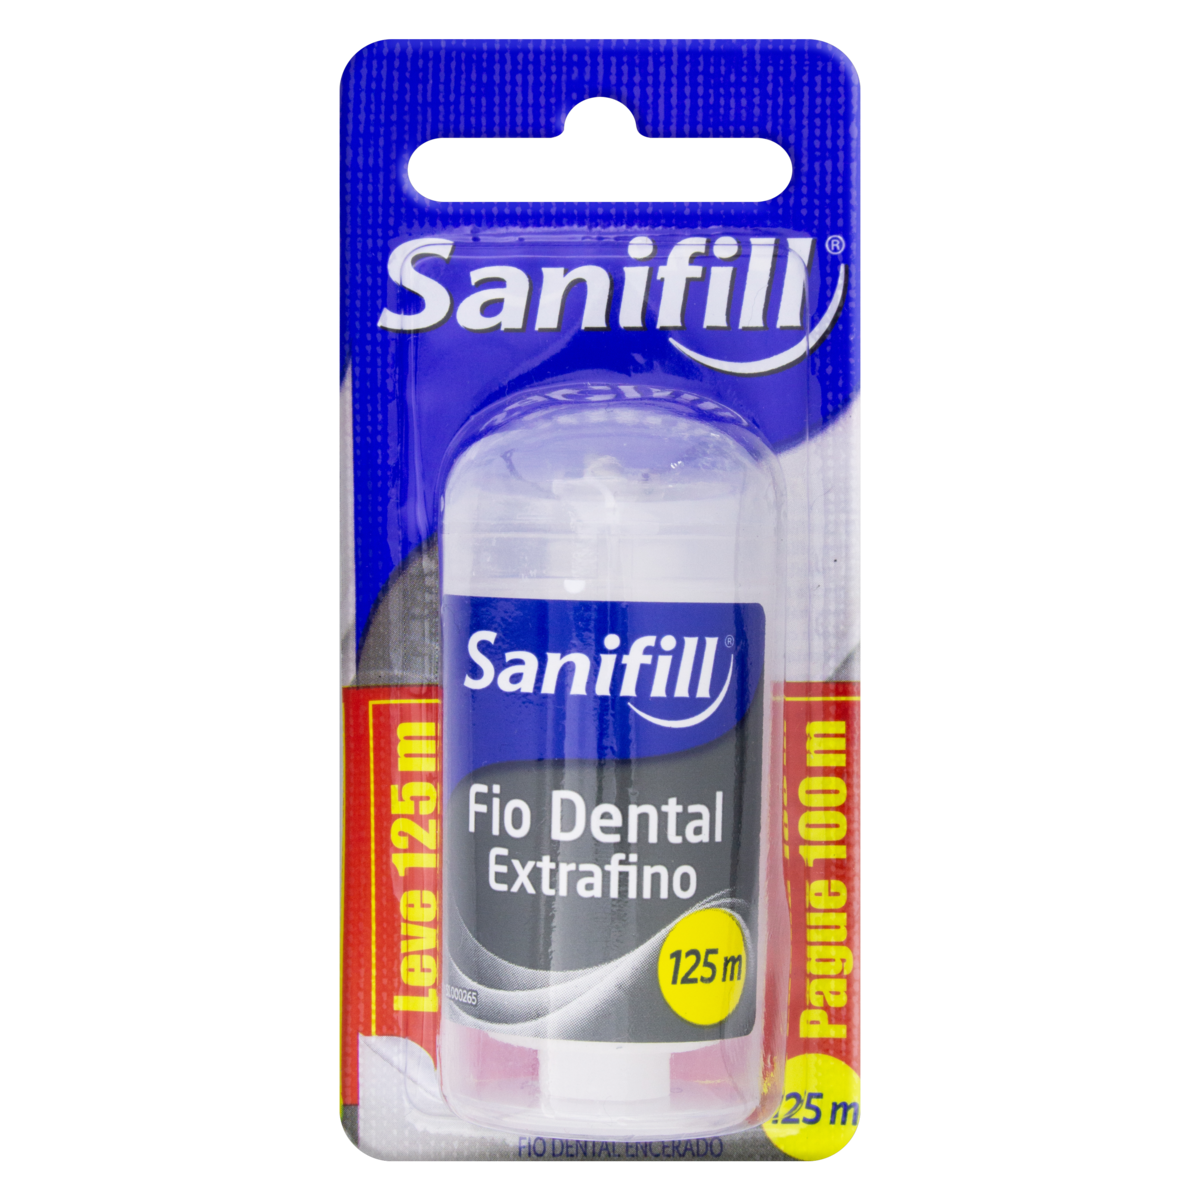 7896114302368 - FIO DENTAL EXTRAFINO SANIFILL BLISTER LEVE 125M PAGUE 100M